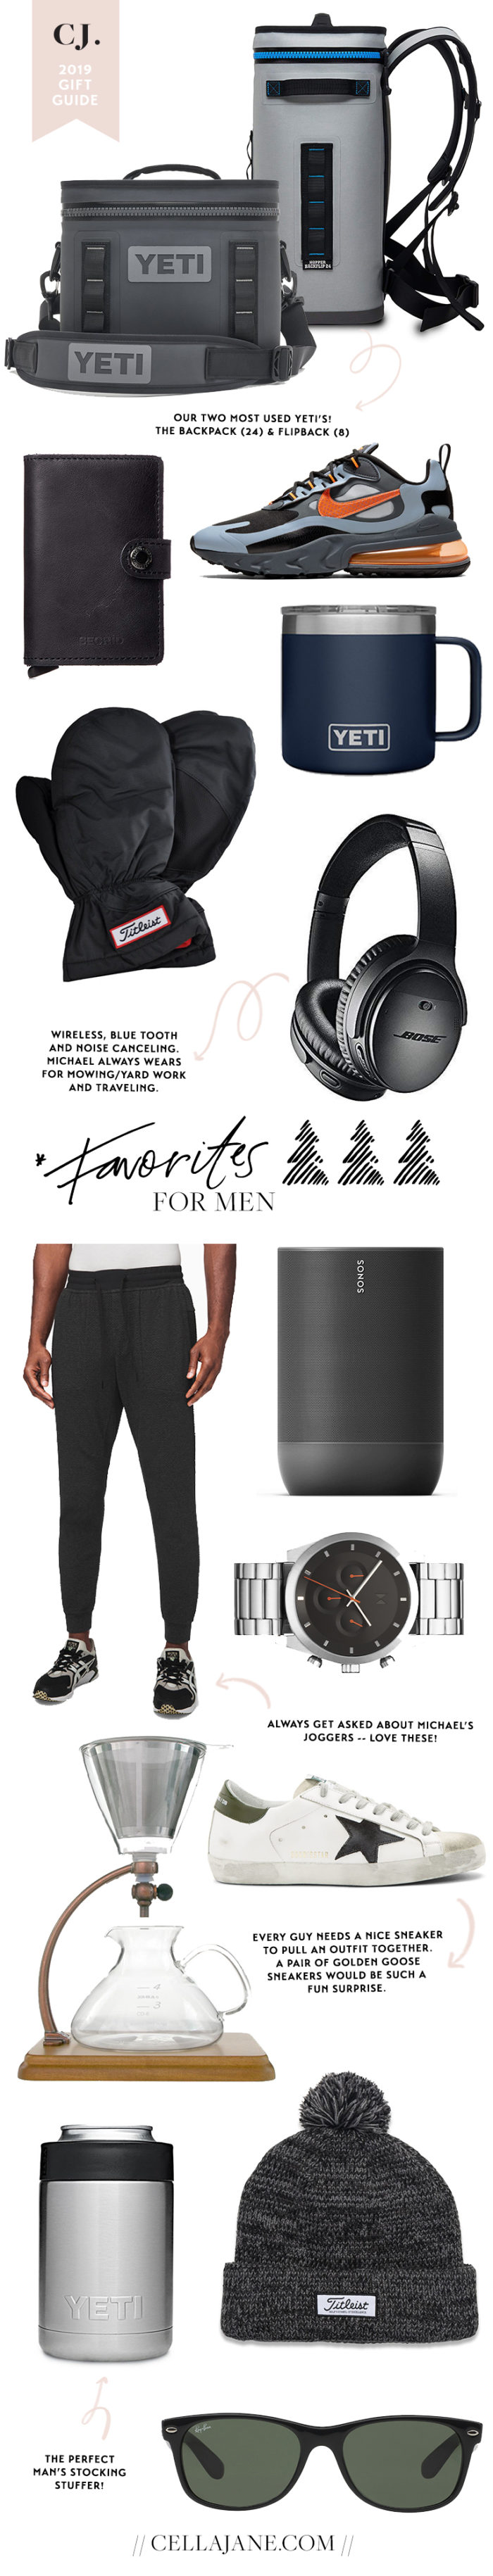 the best gifts for men 2019